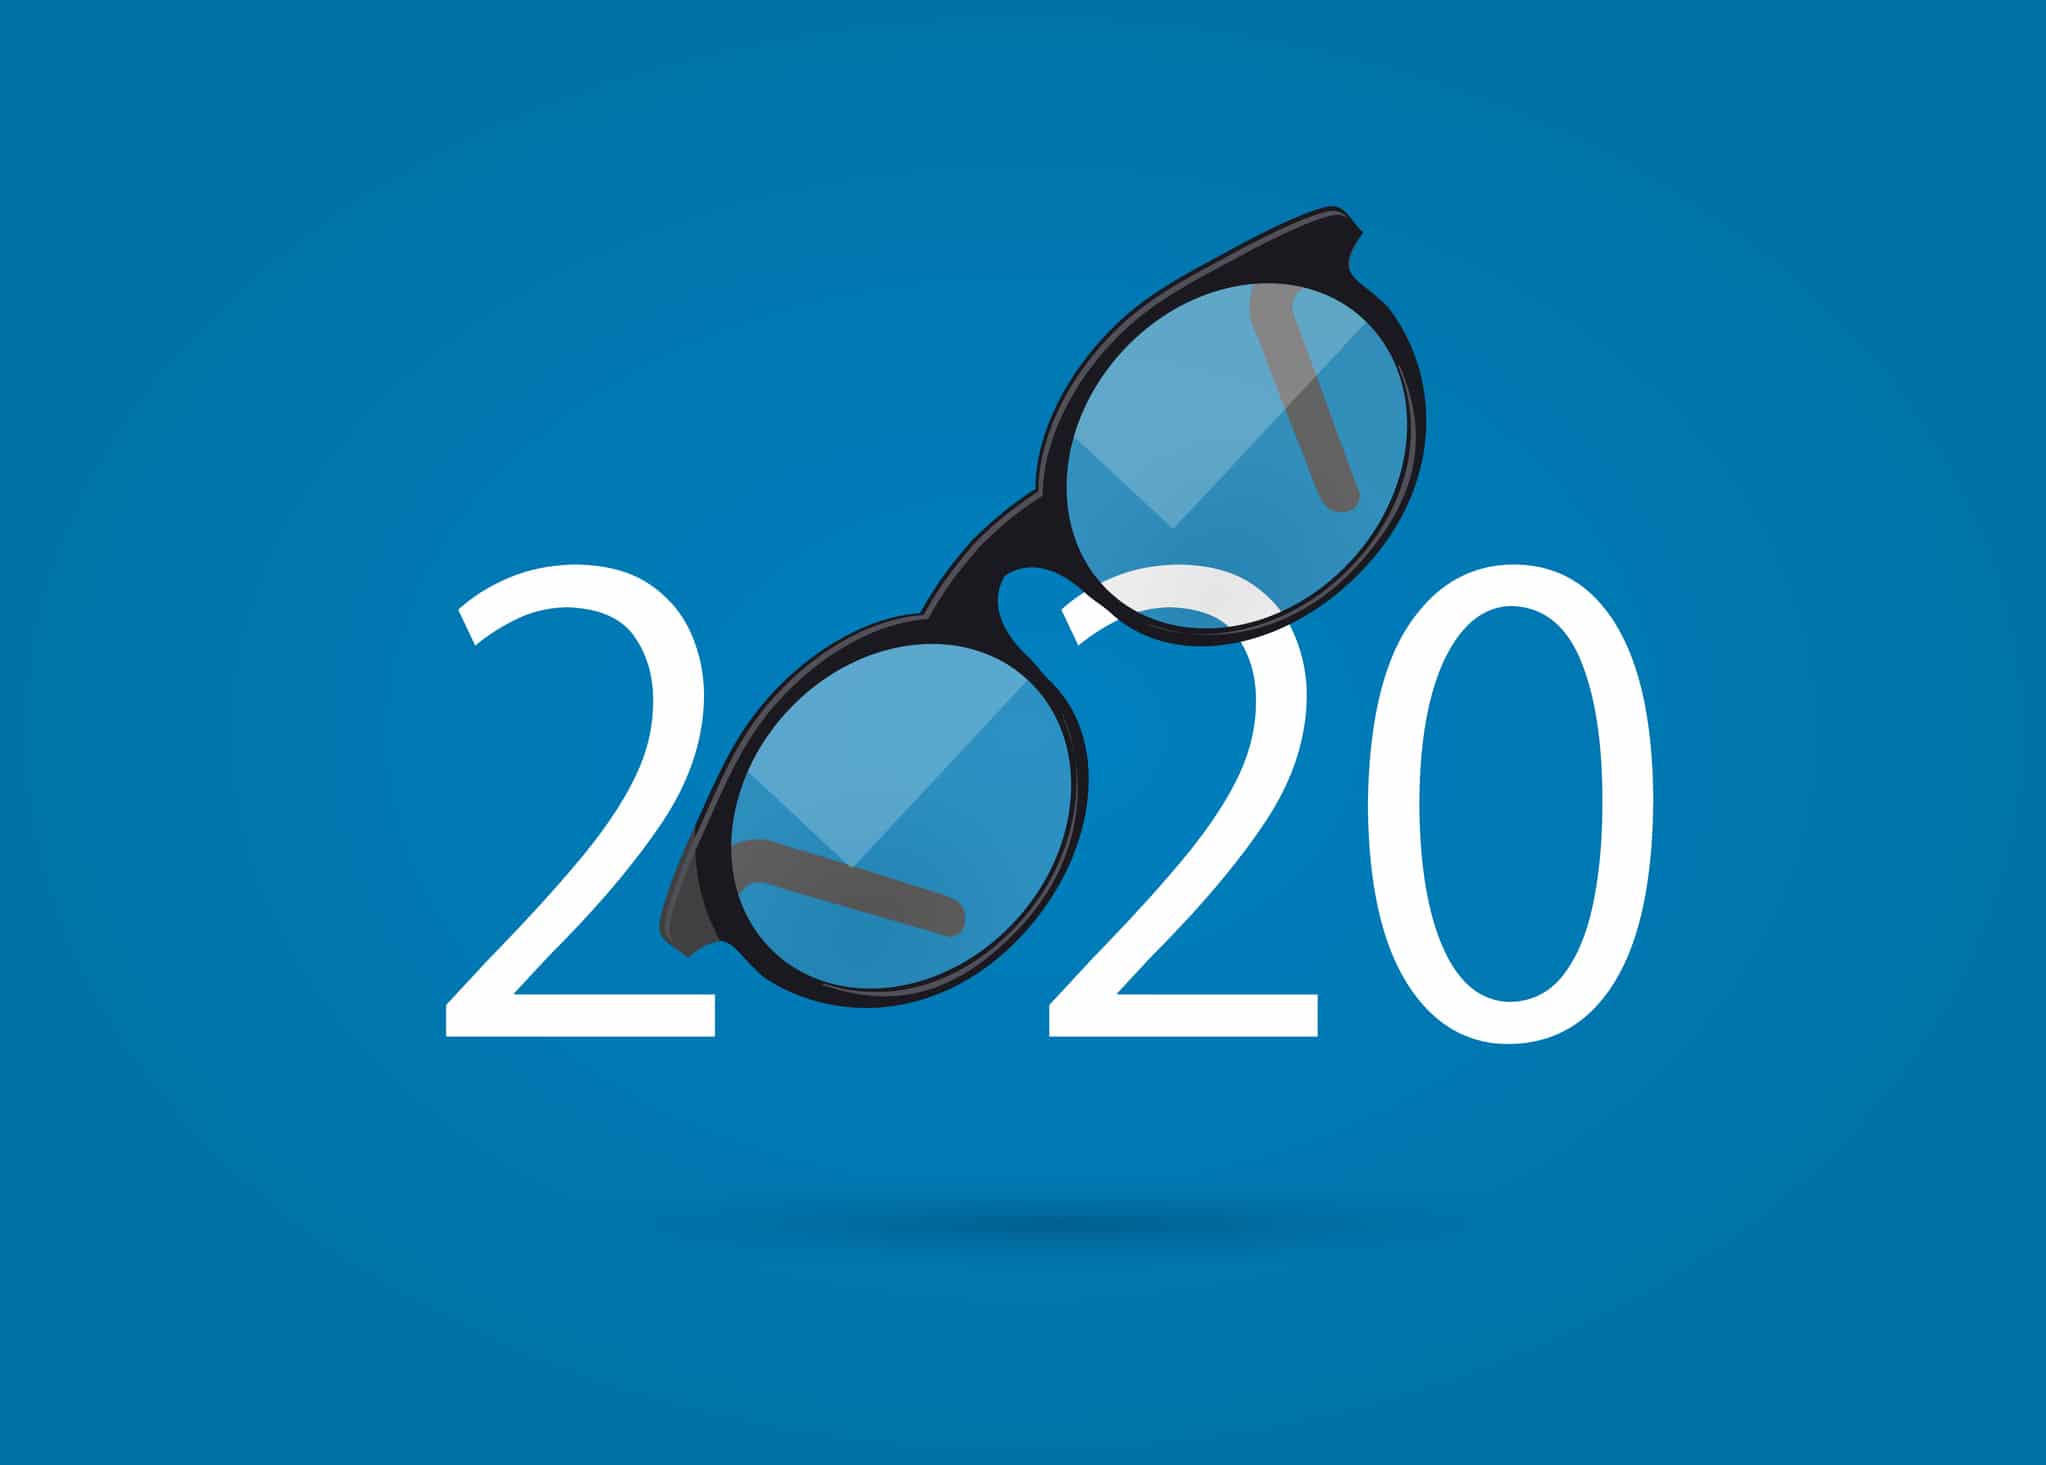 Have a 20/20 view in 2020